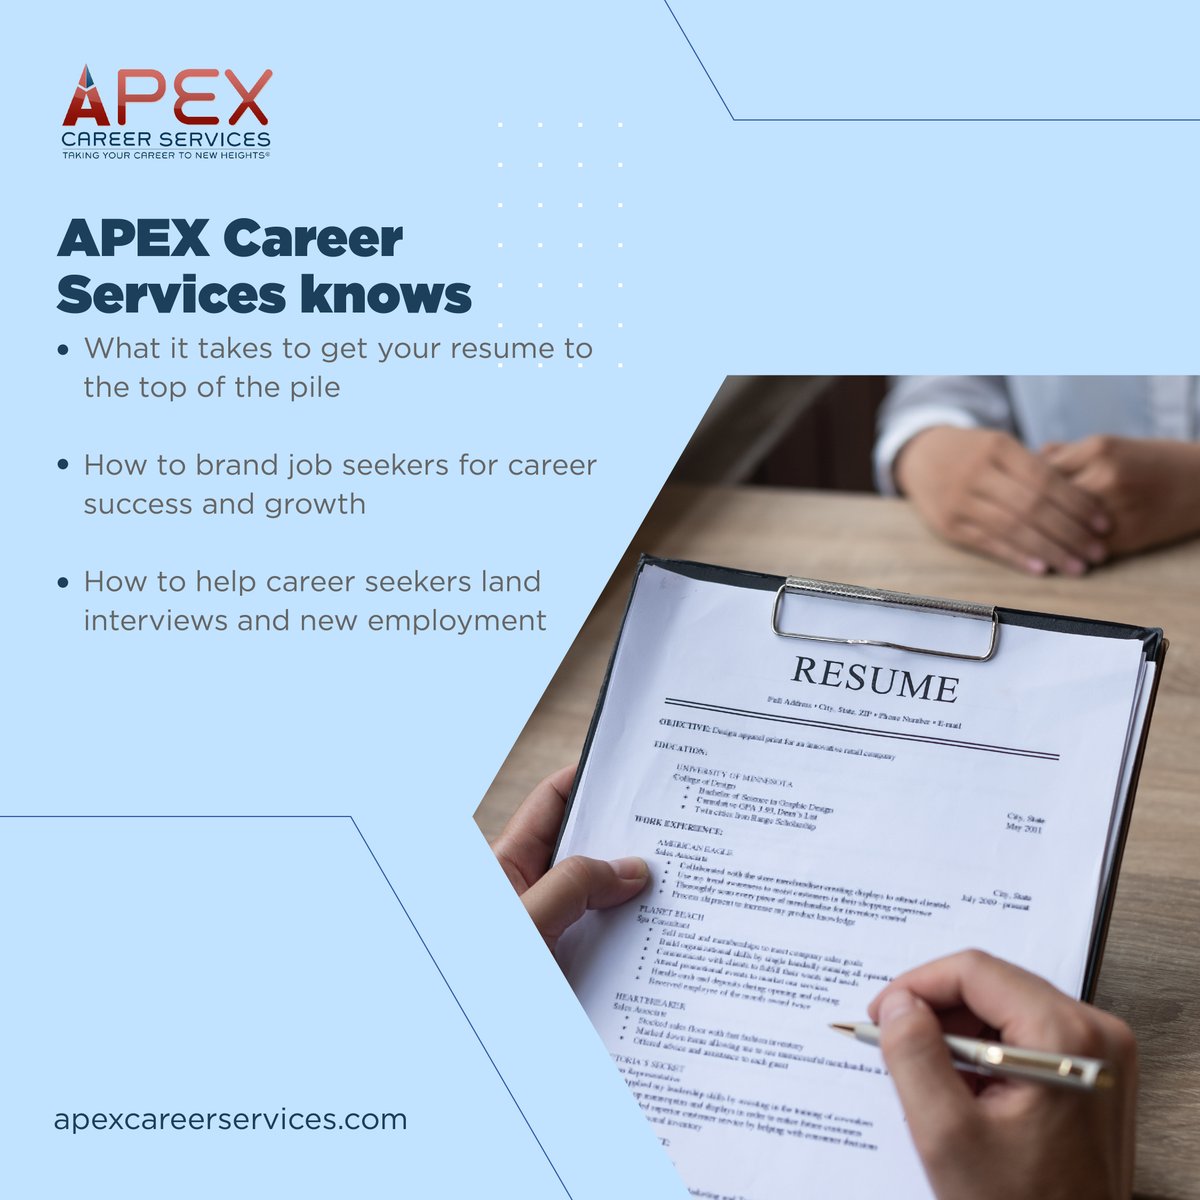 🚀 Elevate Your Career with APEX Career Services' Resumes! 🌐✨

Crafted to land at the top, ensuring interviews that make an impact. 📑💼 Ready for success? Get started: bit.ly/46ZOfzO

#ResumeSuccess #APEXCareerServices 🚀✨